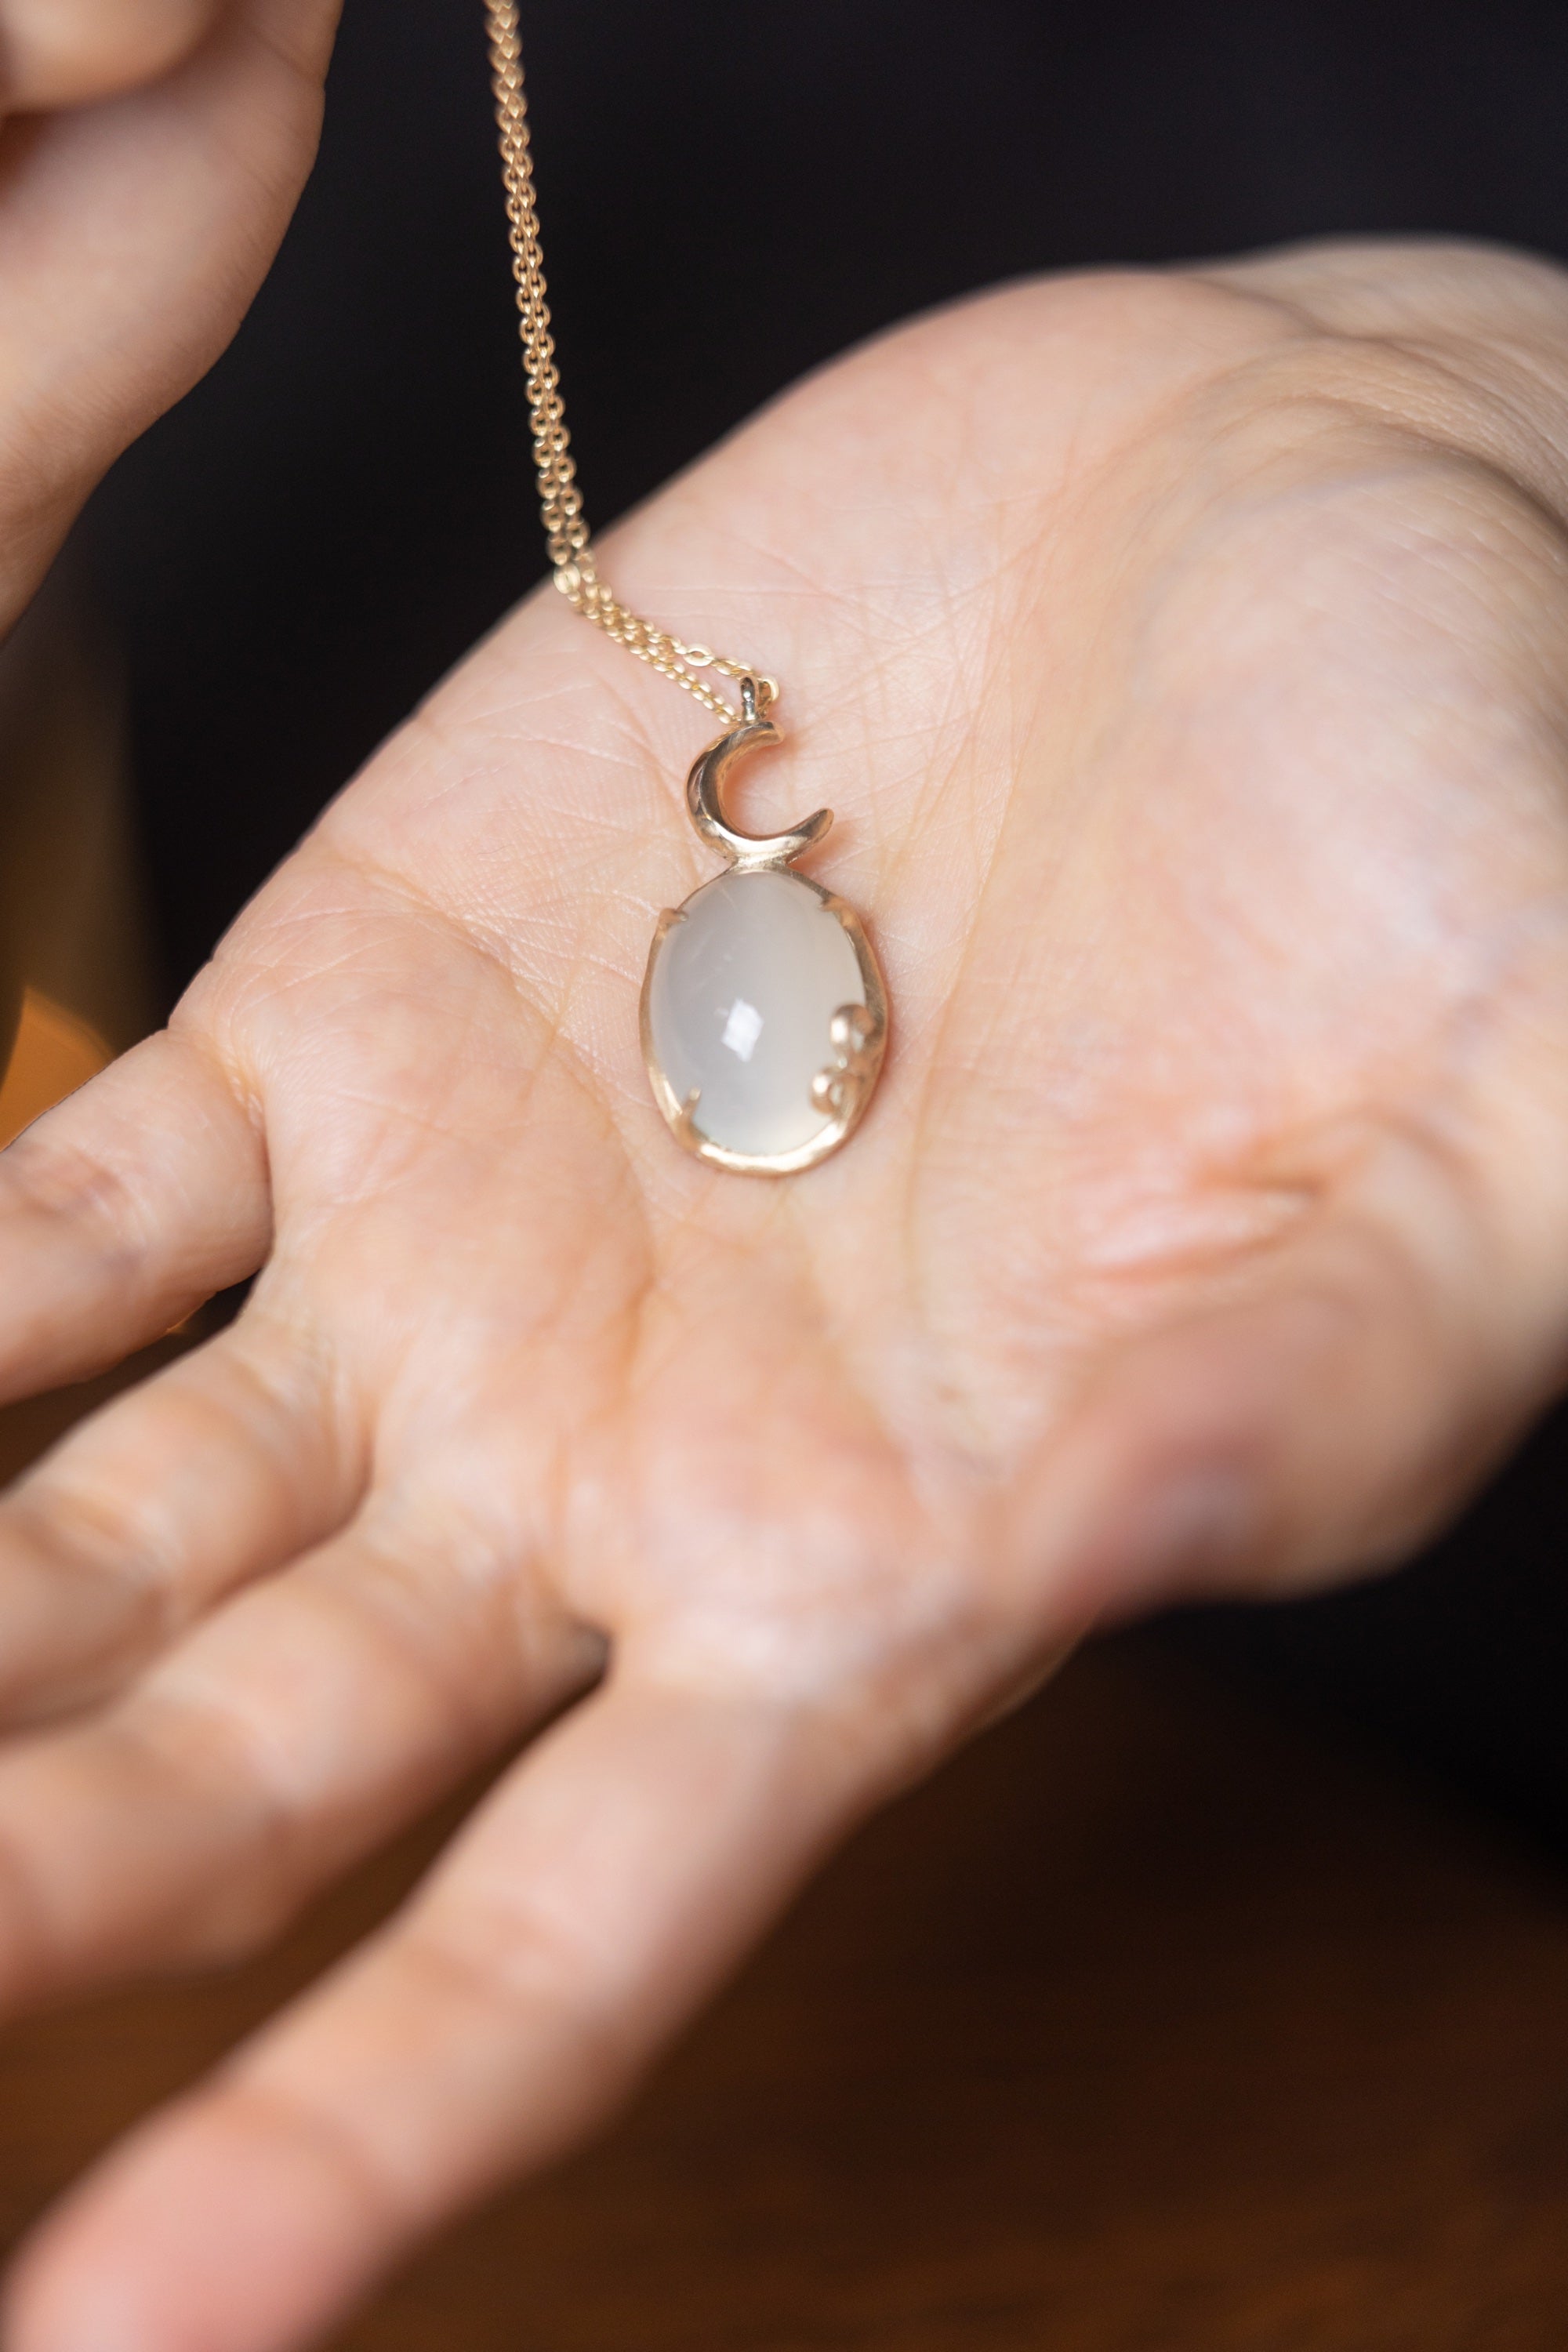 Large Moonstone Cabochon with Gold Crescent Moon Necklace (10k)